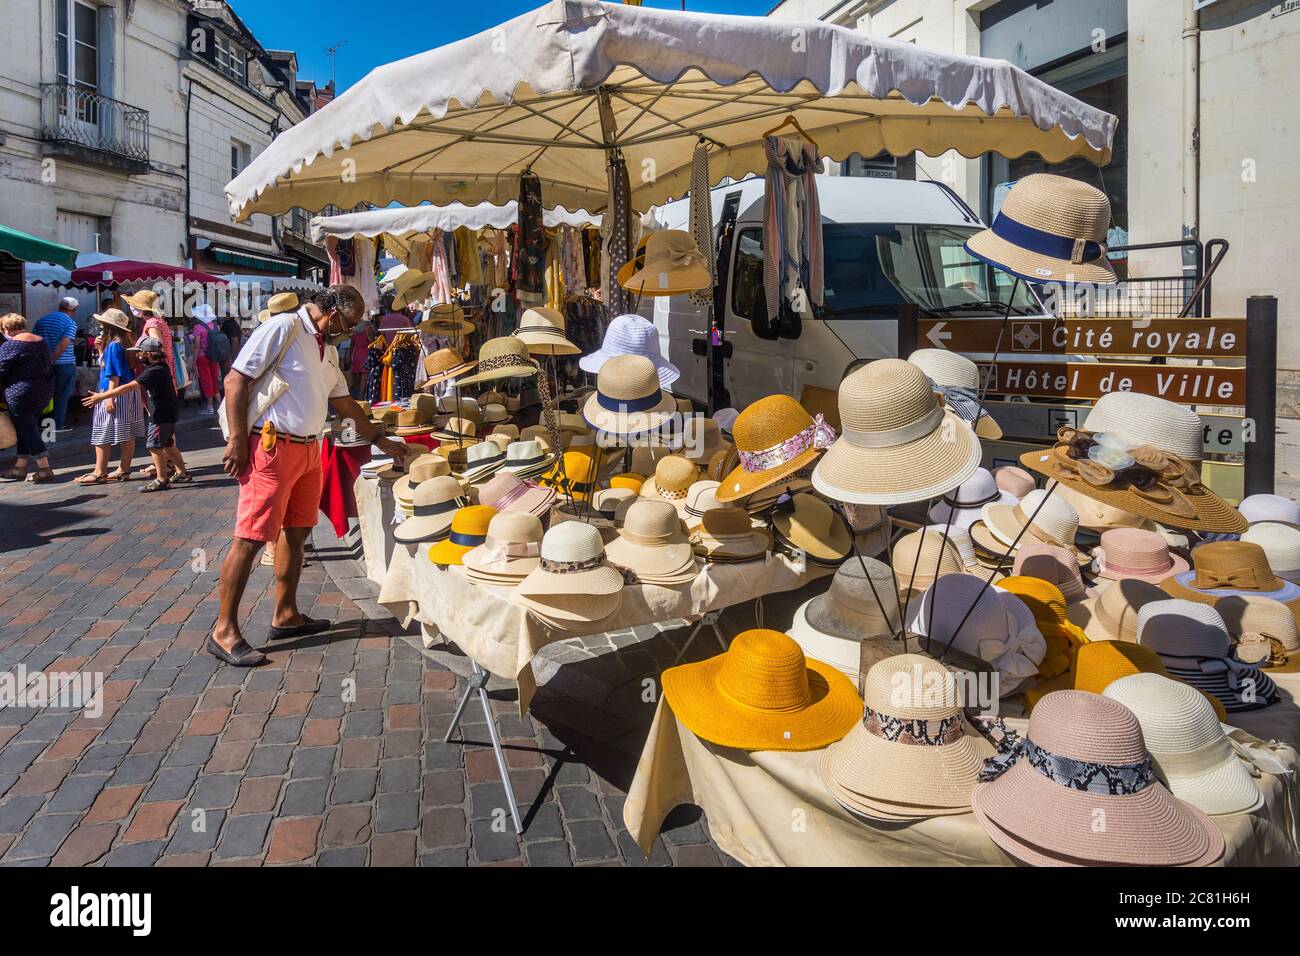 Man looking at straw hats in French open-air market - Loches, Indre-et-Loire, France. Stock Photo